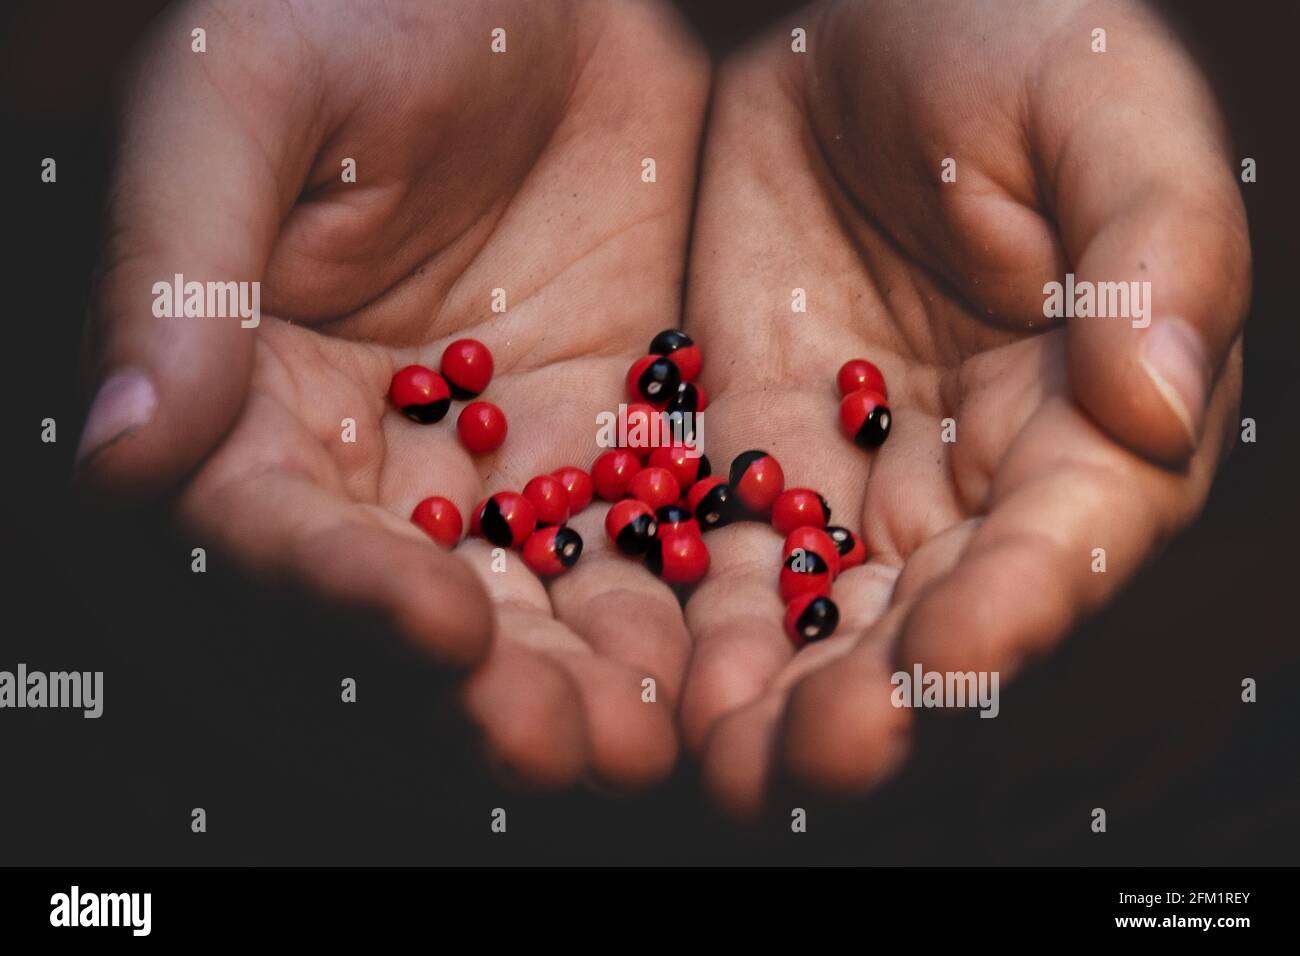 Group of small abrus precatorius beans in a person's palms Stock Photo